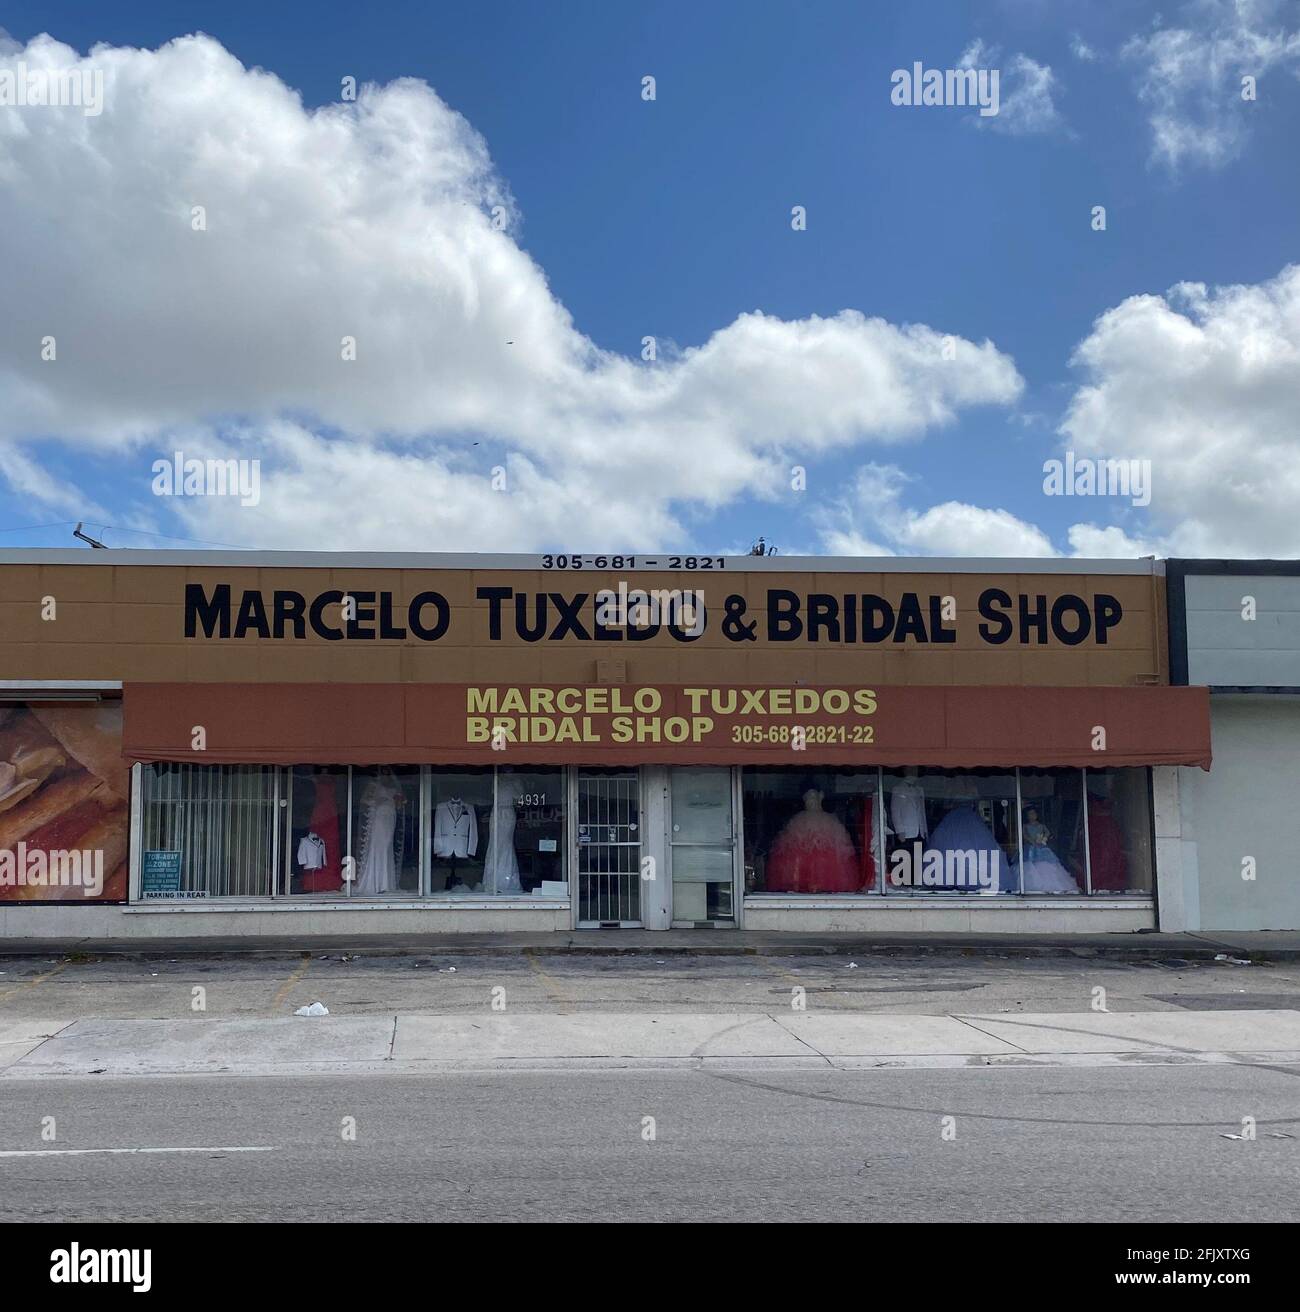 Building entrance of Marcelo's Tuxedo  Bridal Shop. They offer rentals for formal wear supplies for weddings and other classy events. Stock Photo